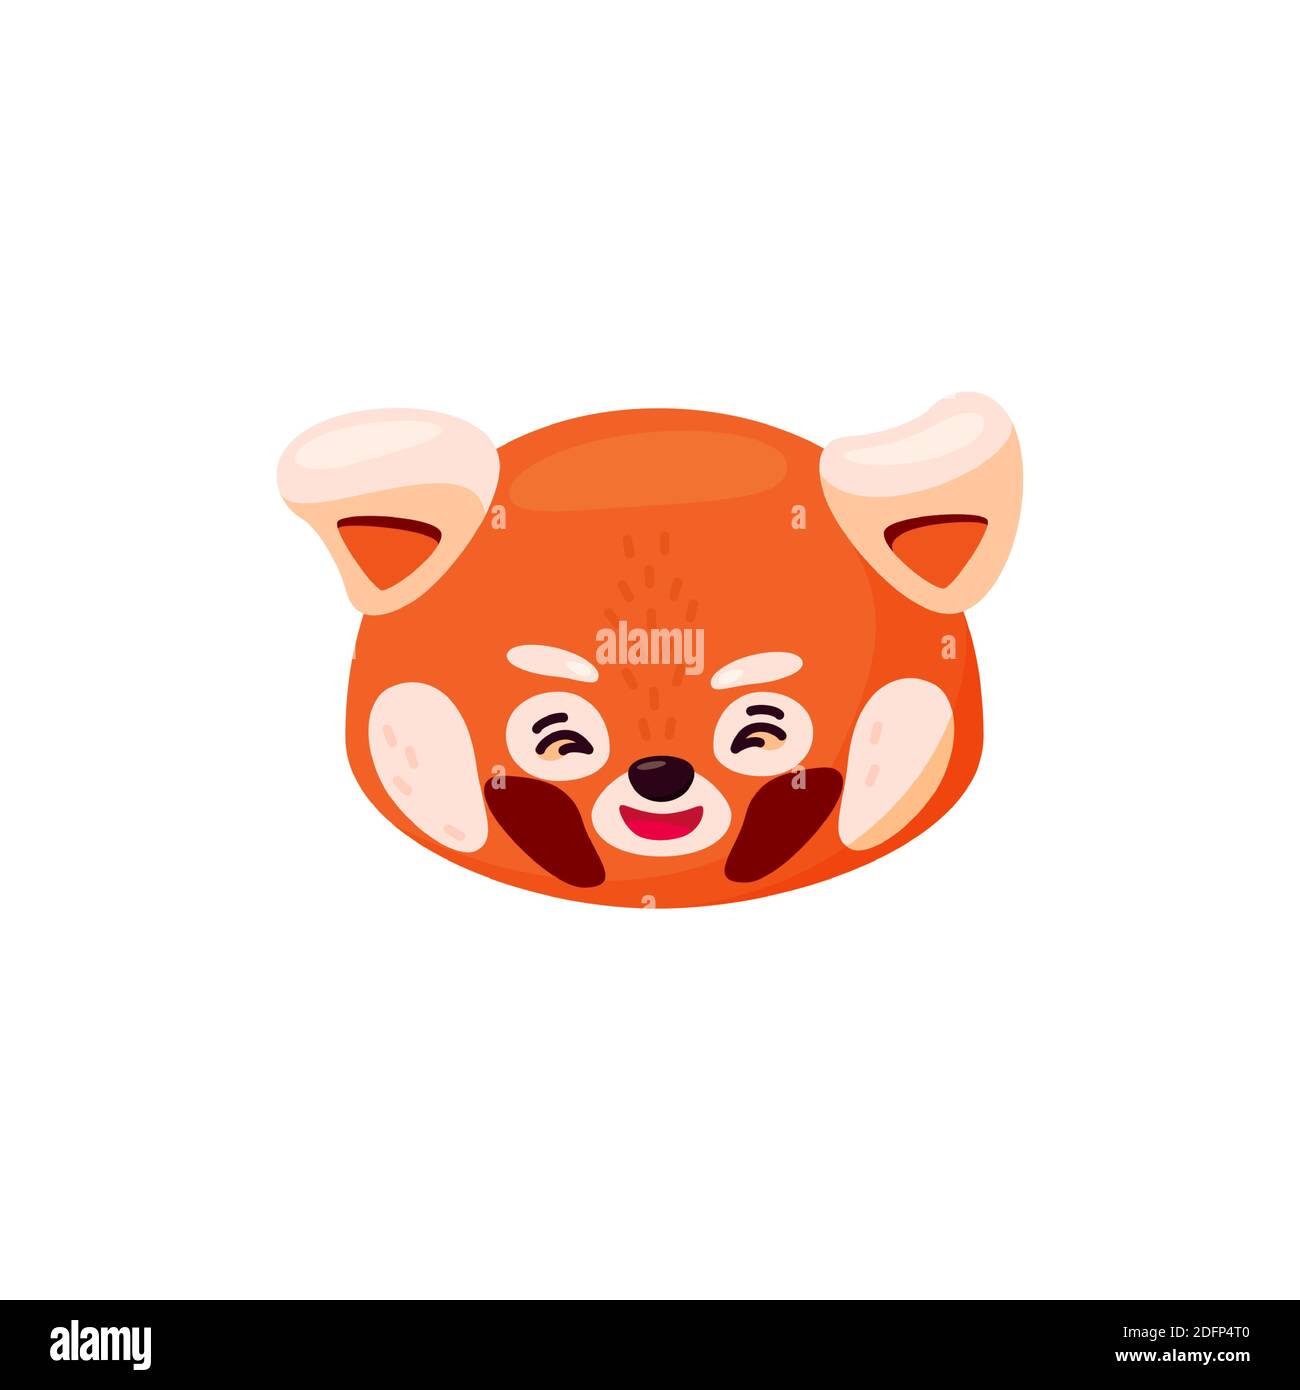 Red panda head as emoji. Cheerful expression. Vector illustration of smiley animal in cartoon style Stock Vector